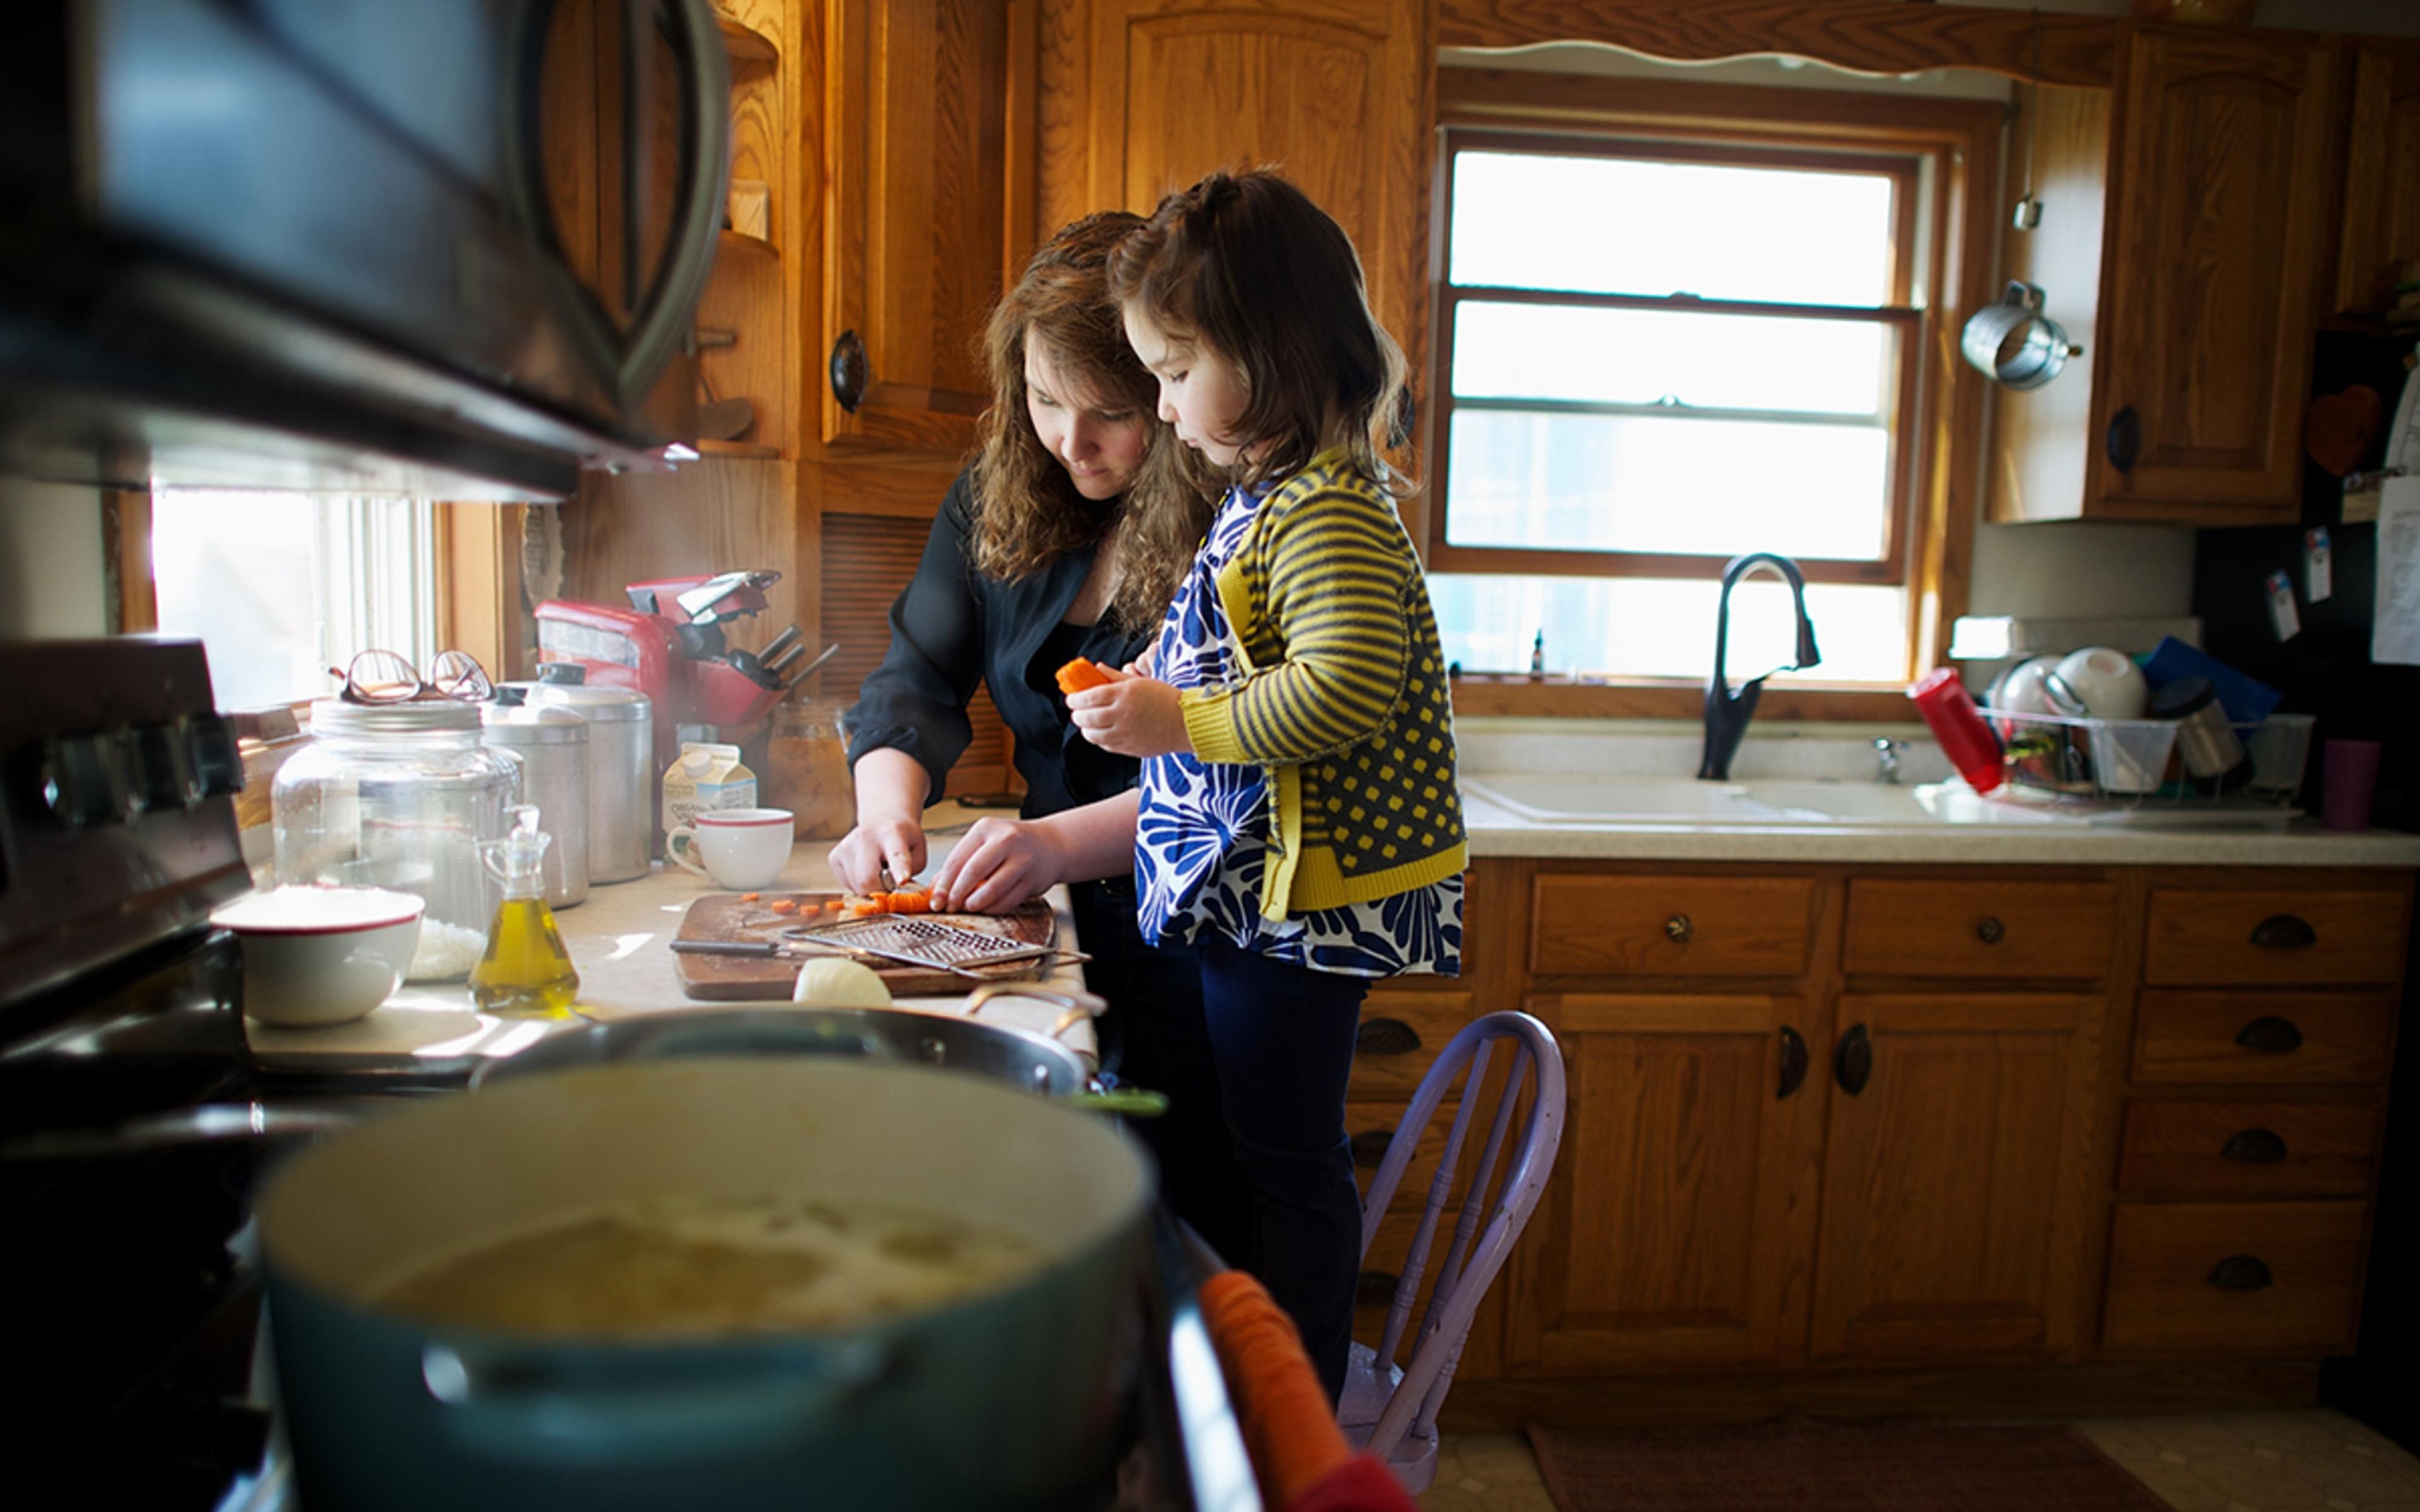 A girl stands on a chair at the kitchen counter and watches her sister chop carrots. A pot of soup simmers on the stove.